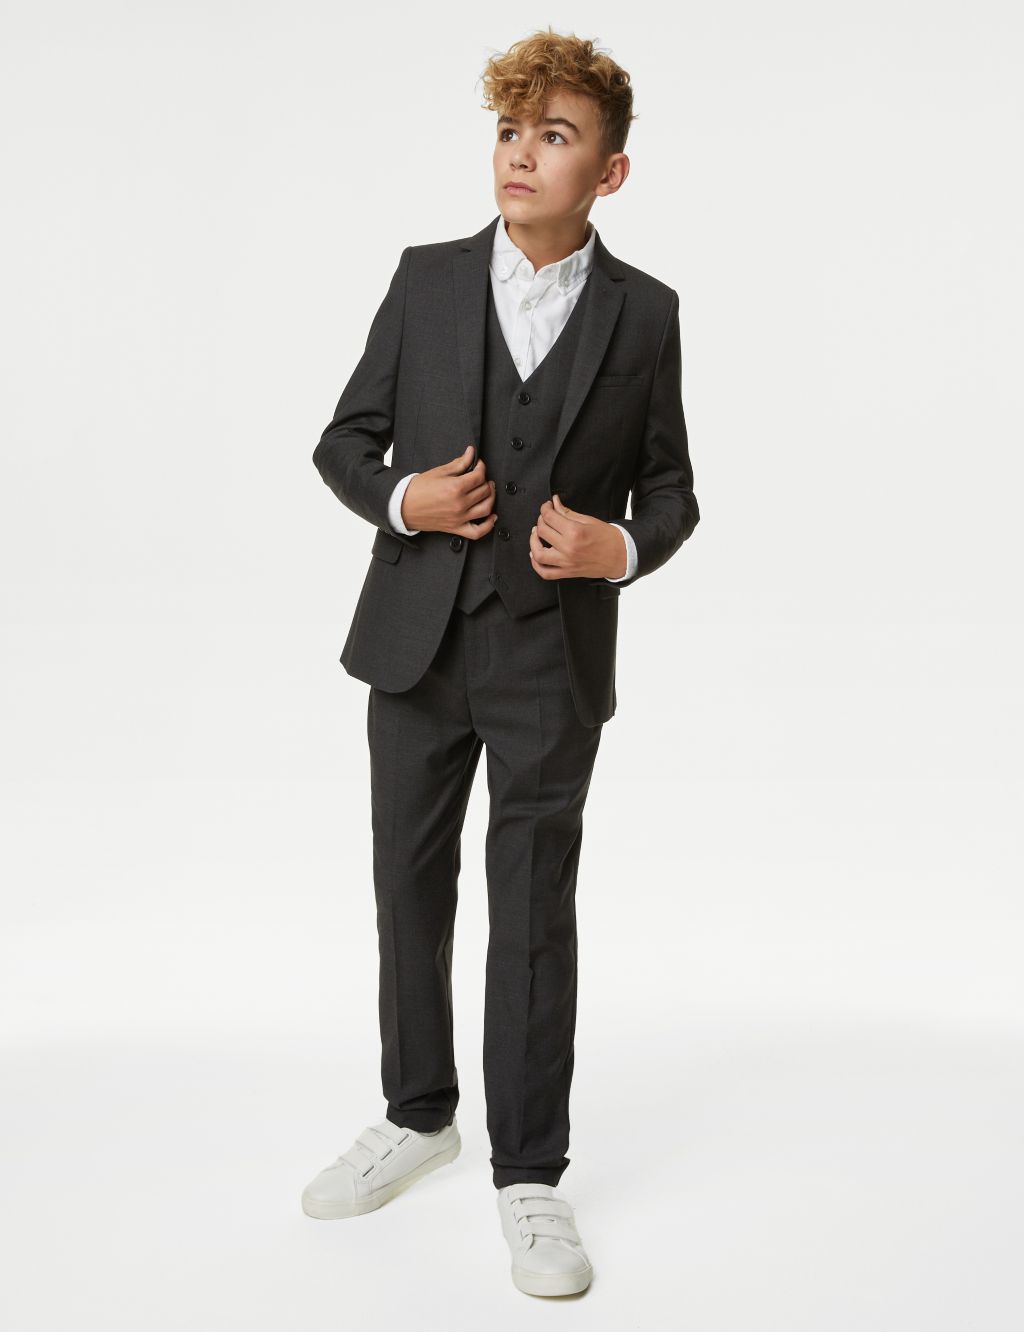 Jacket, Trouser & Waistcoat Outfit image 7